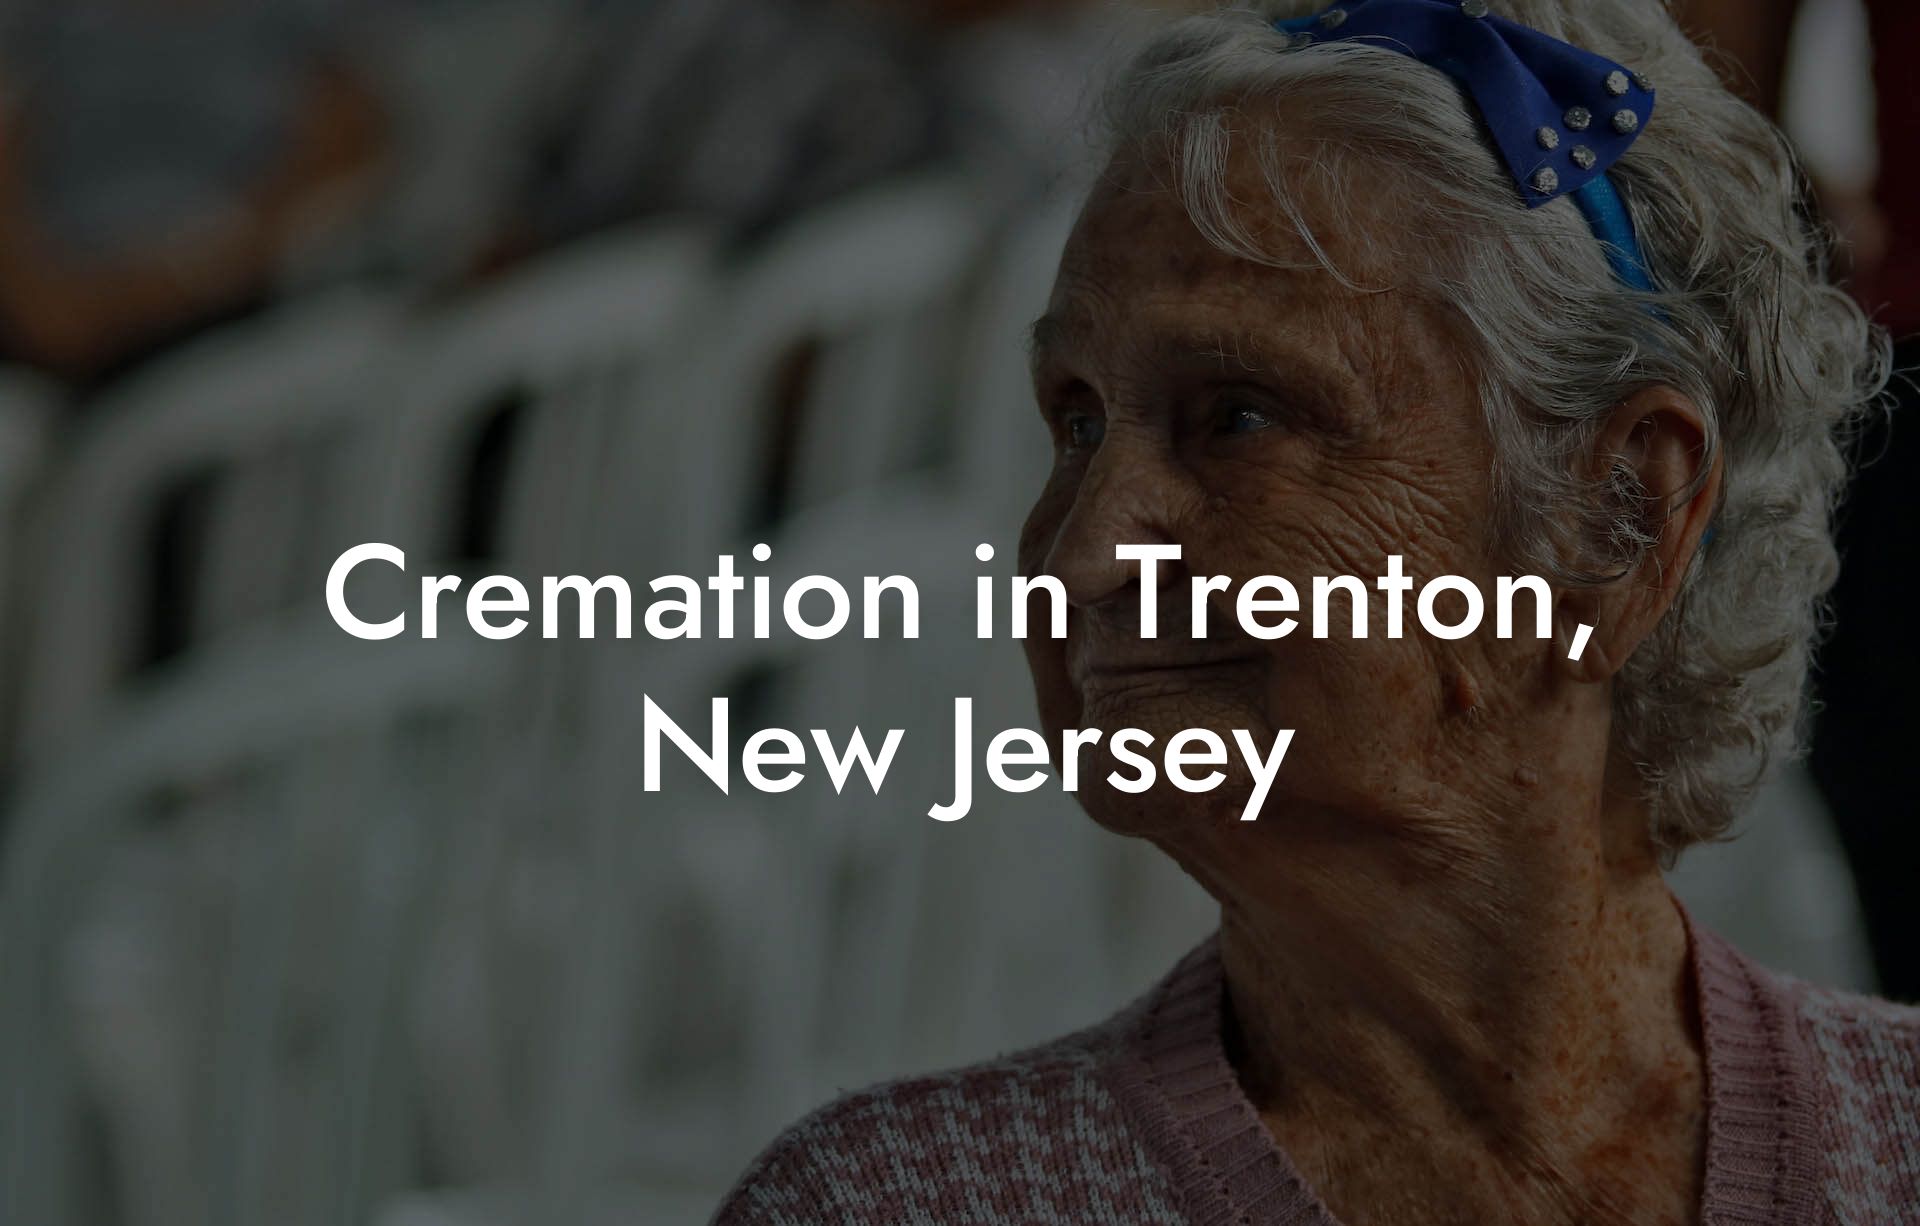 Cremation in Trenton, New Jersey